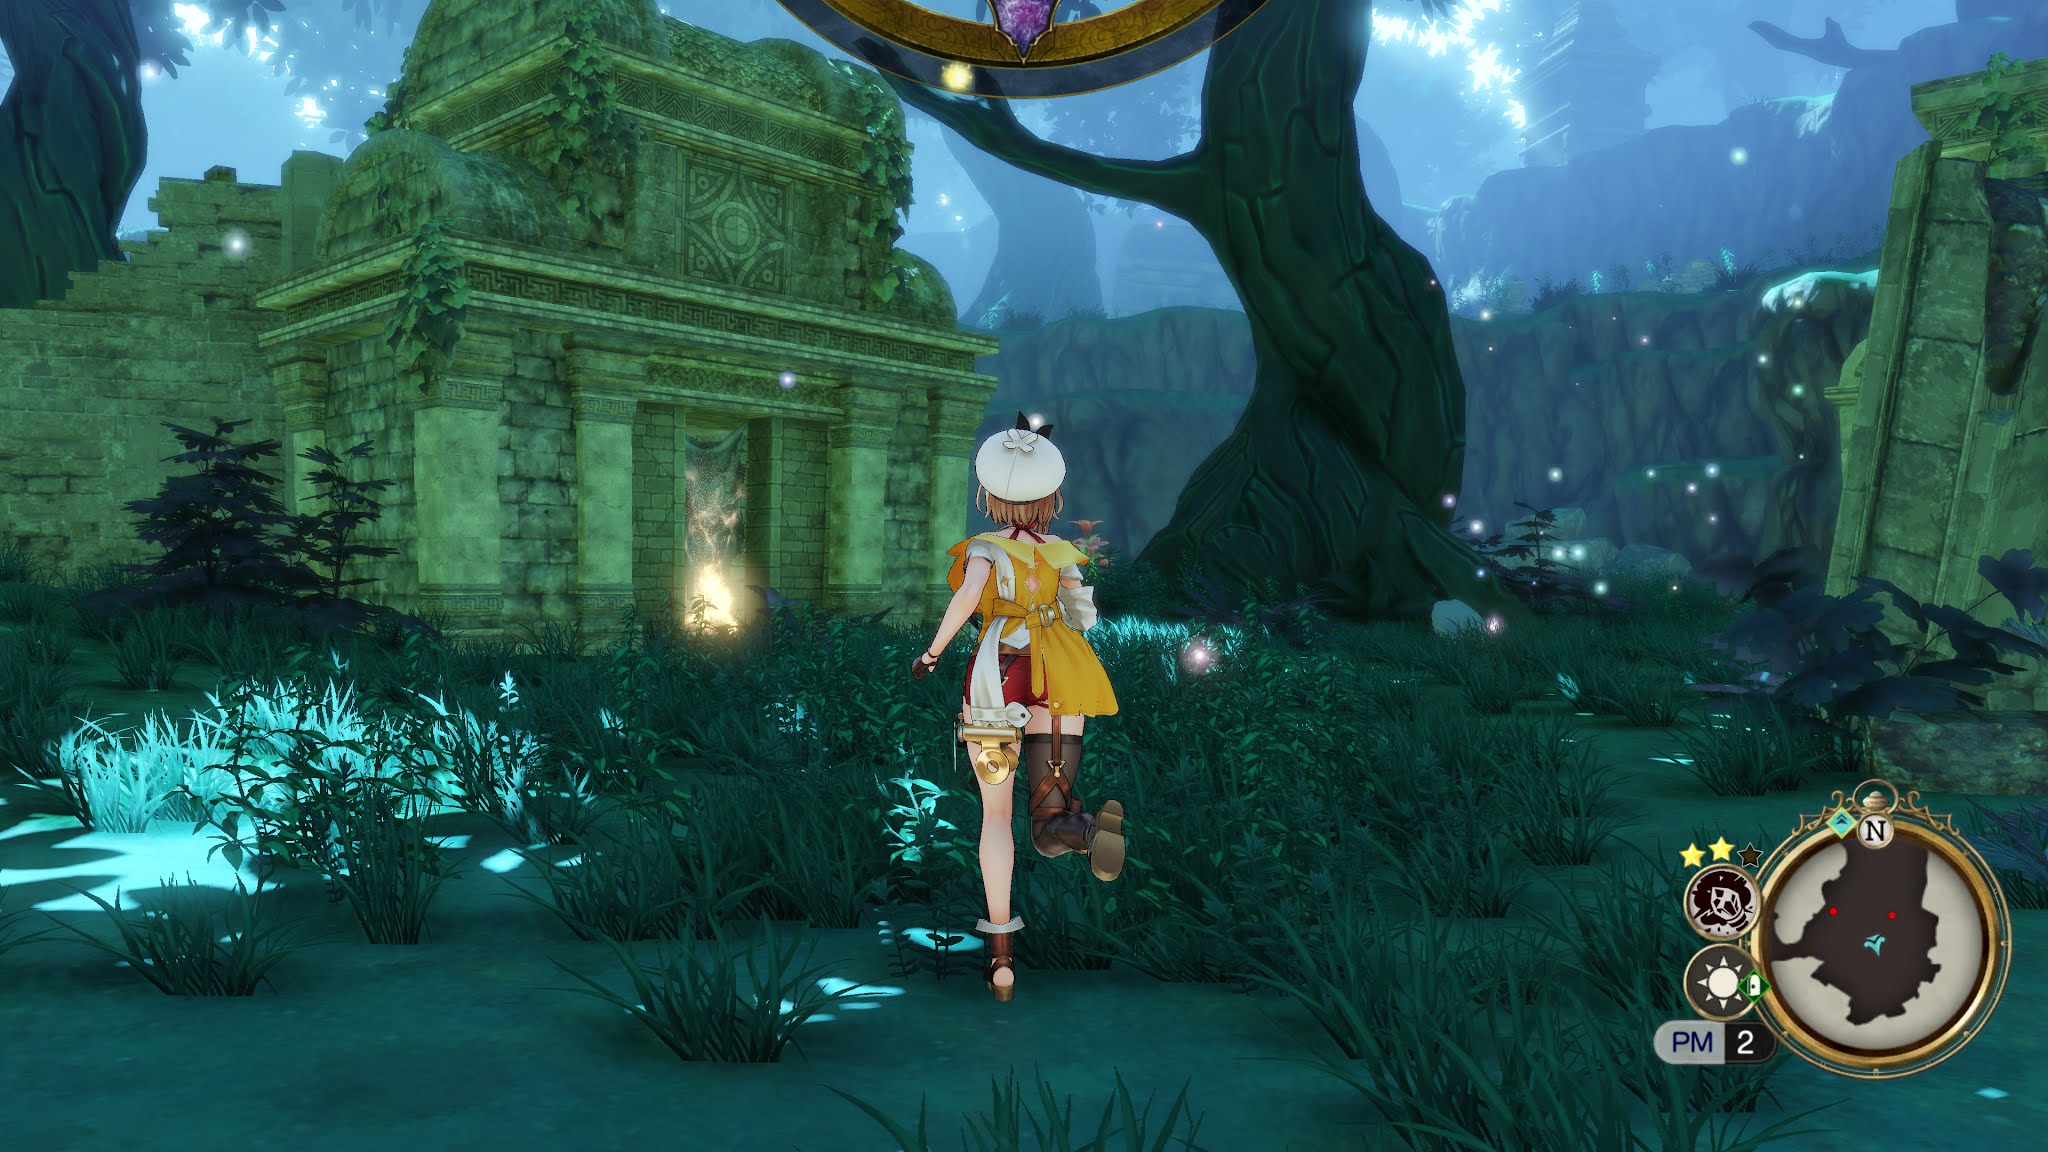 Atelier Ryza 2: Memory and Ruin Fragment locations in the game